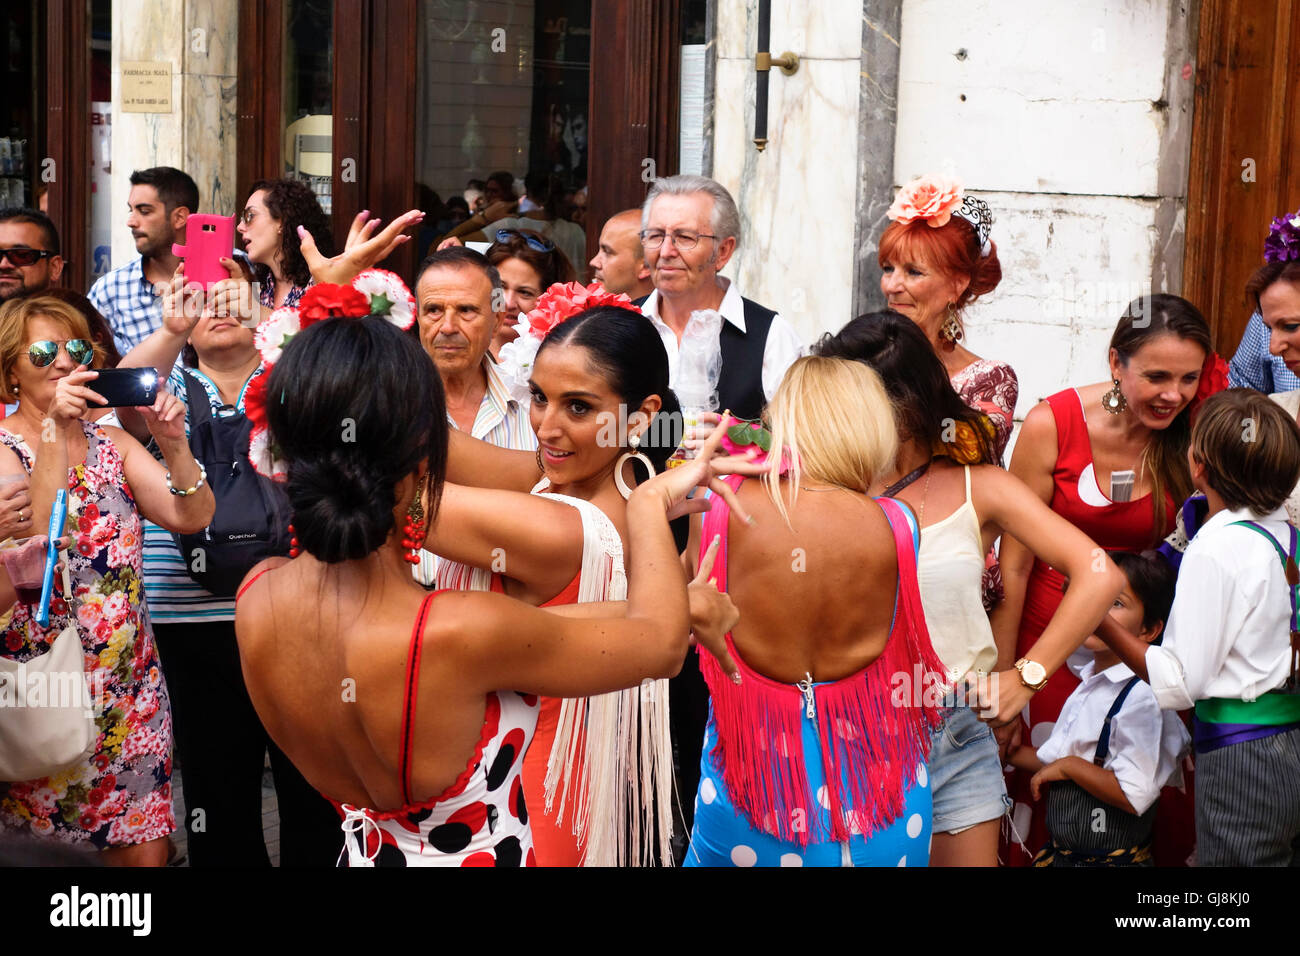 Malaga, Andalusia, Spain. 13th Aug, 2016. Beautiful women dressed in flamenco dresses dancing Sevillanas, during start of Annual Feria of Malaga, Southern Spain's biggest summer fair starts. The feria celebrations. Credit:  Perry van Munster/Alamy Live News Stock Photo